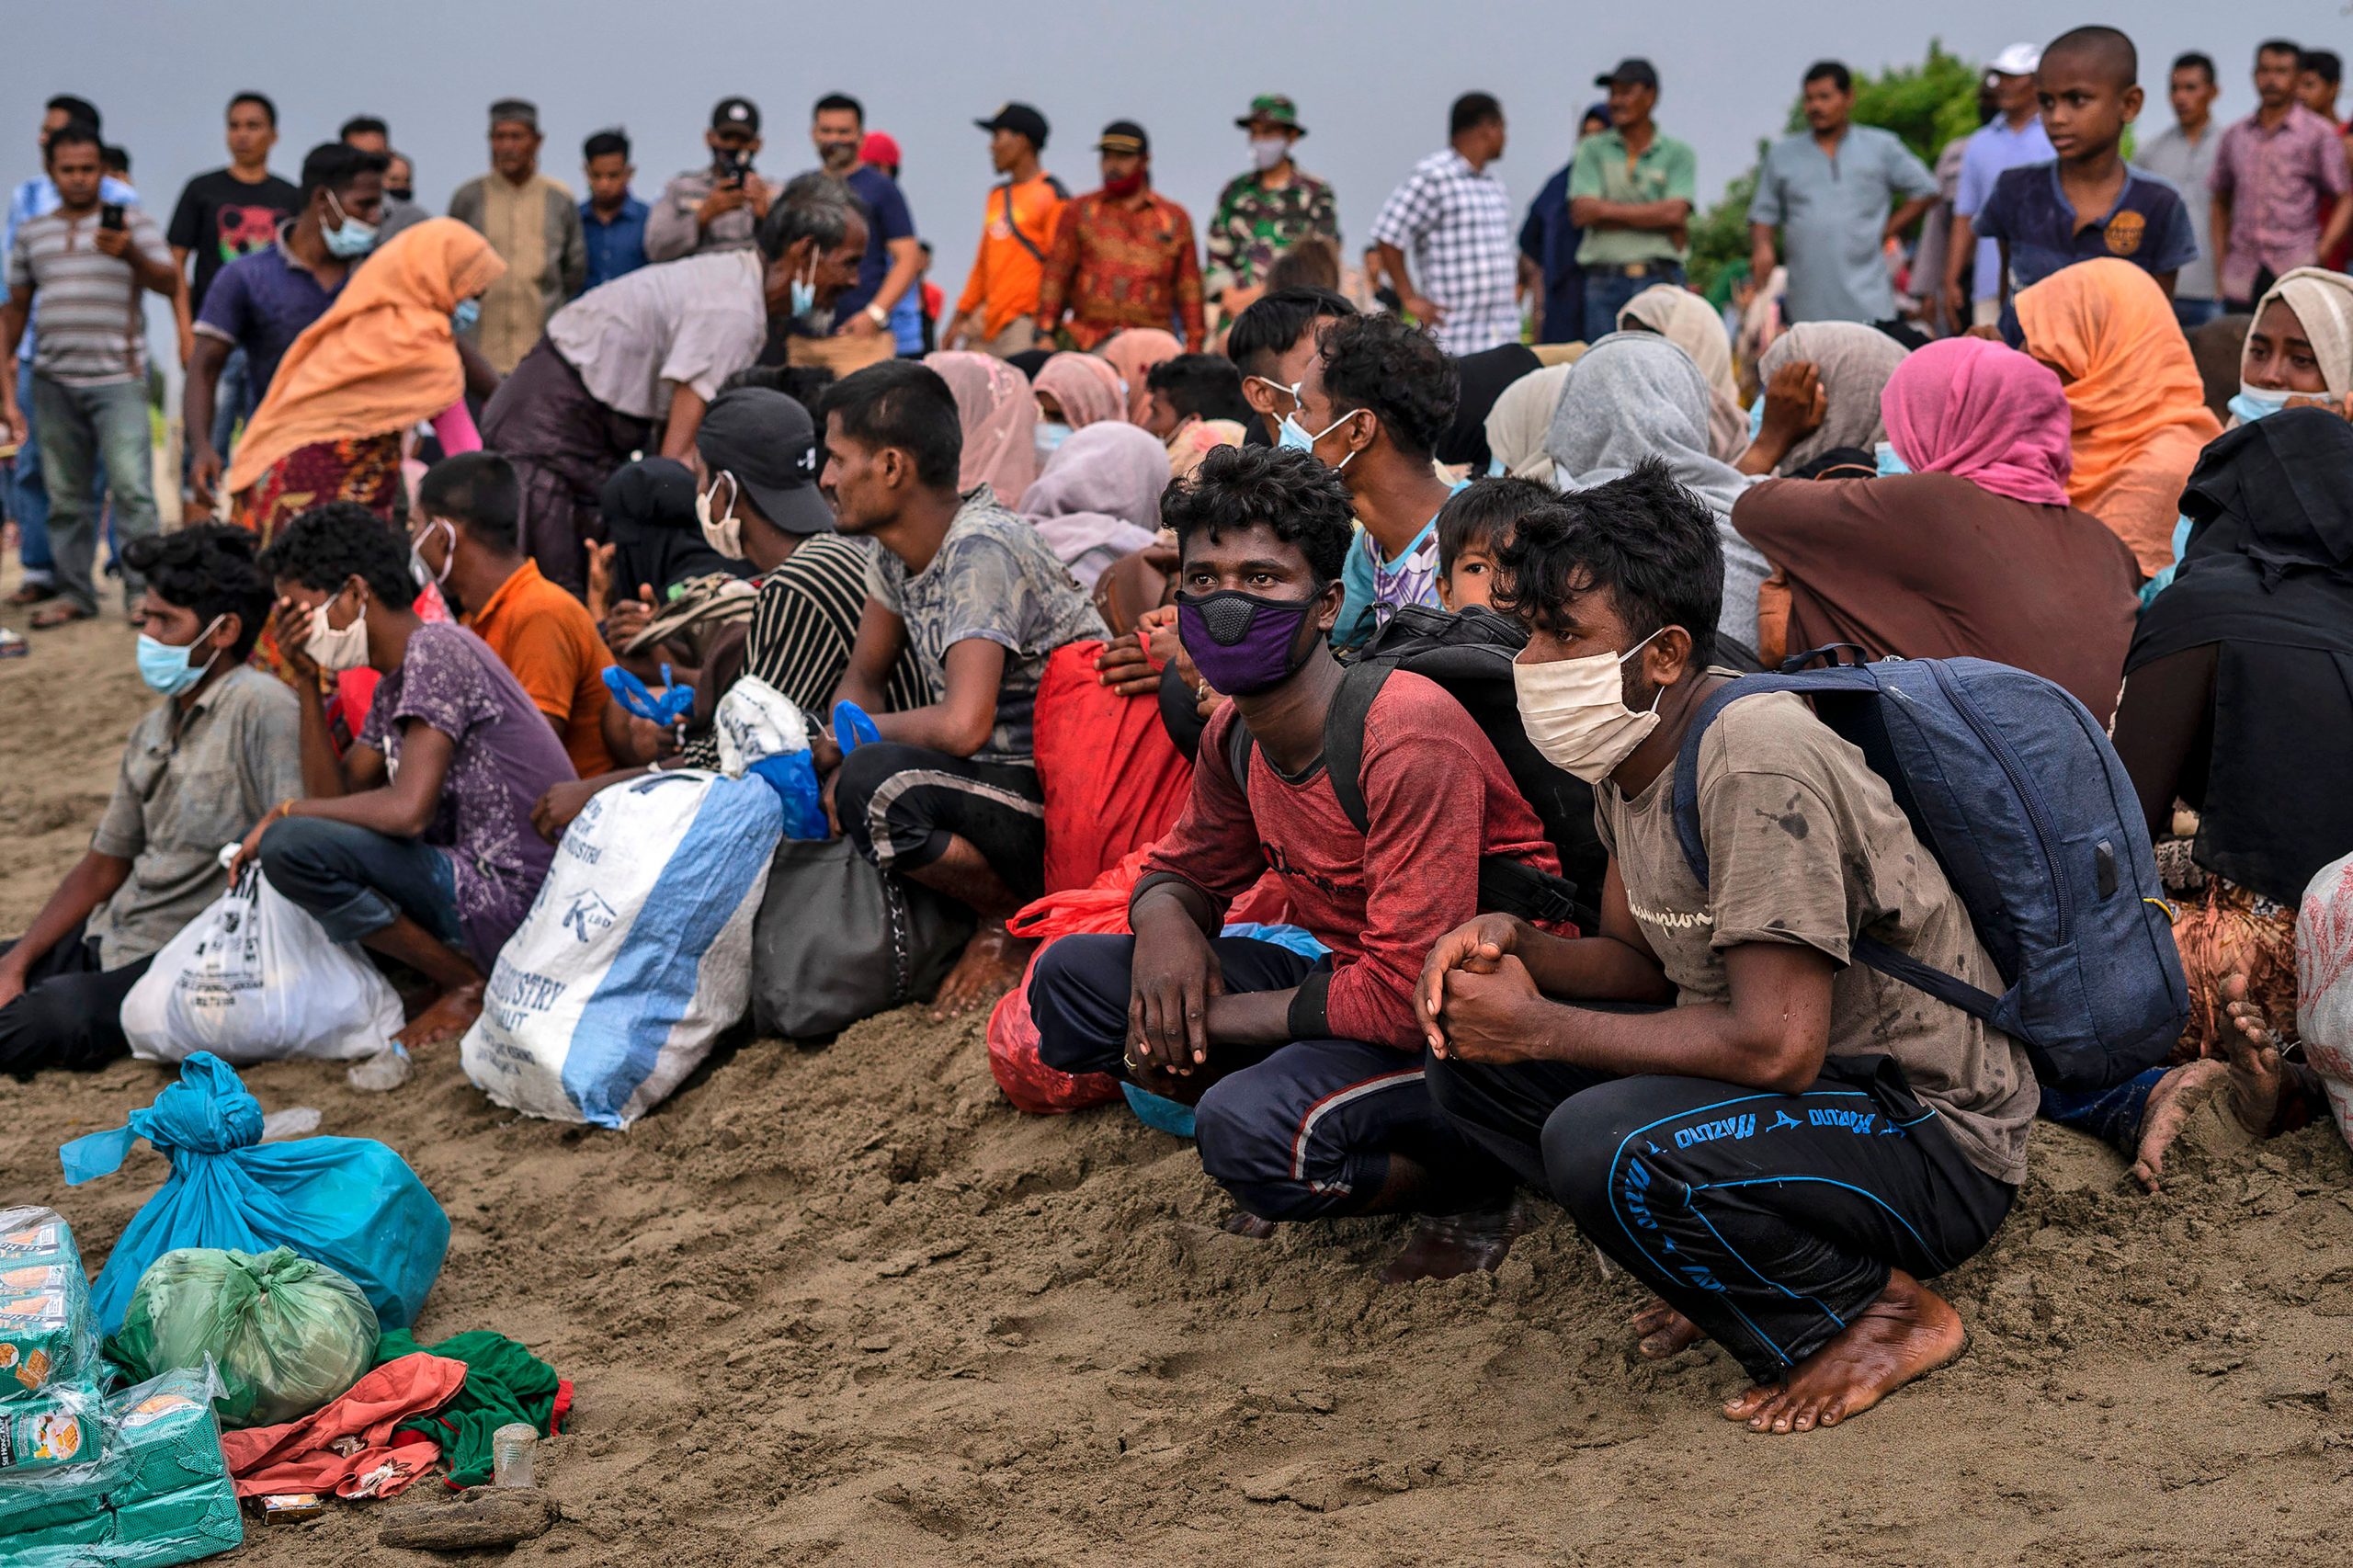 Smugglers beat up Rohingya refugees over quality of food on trafficking boat | Watch